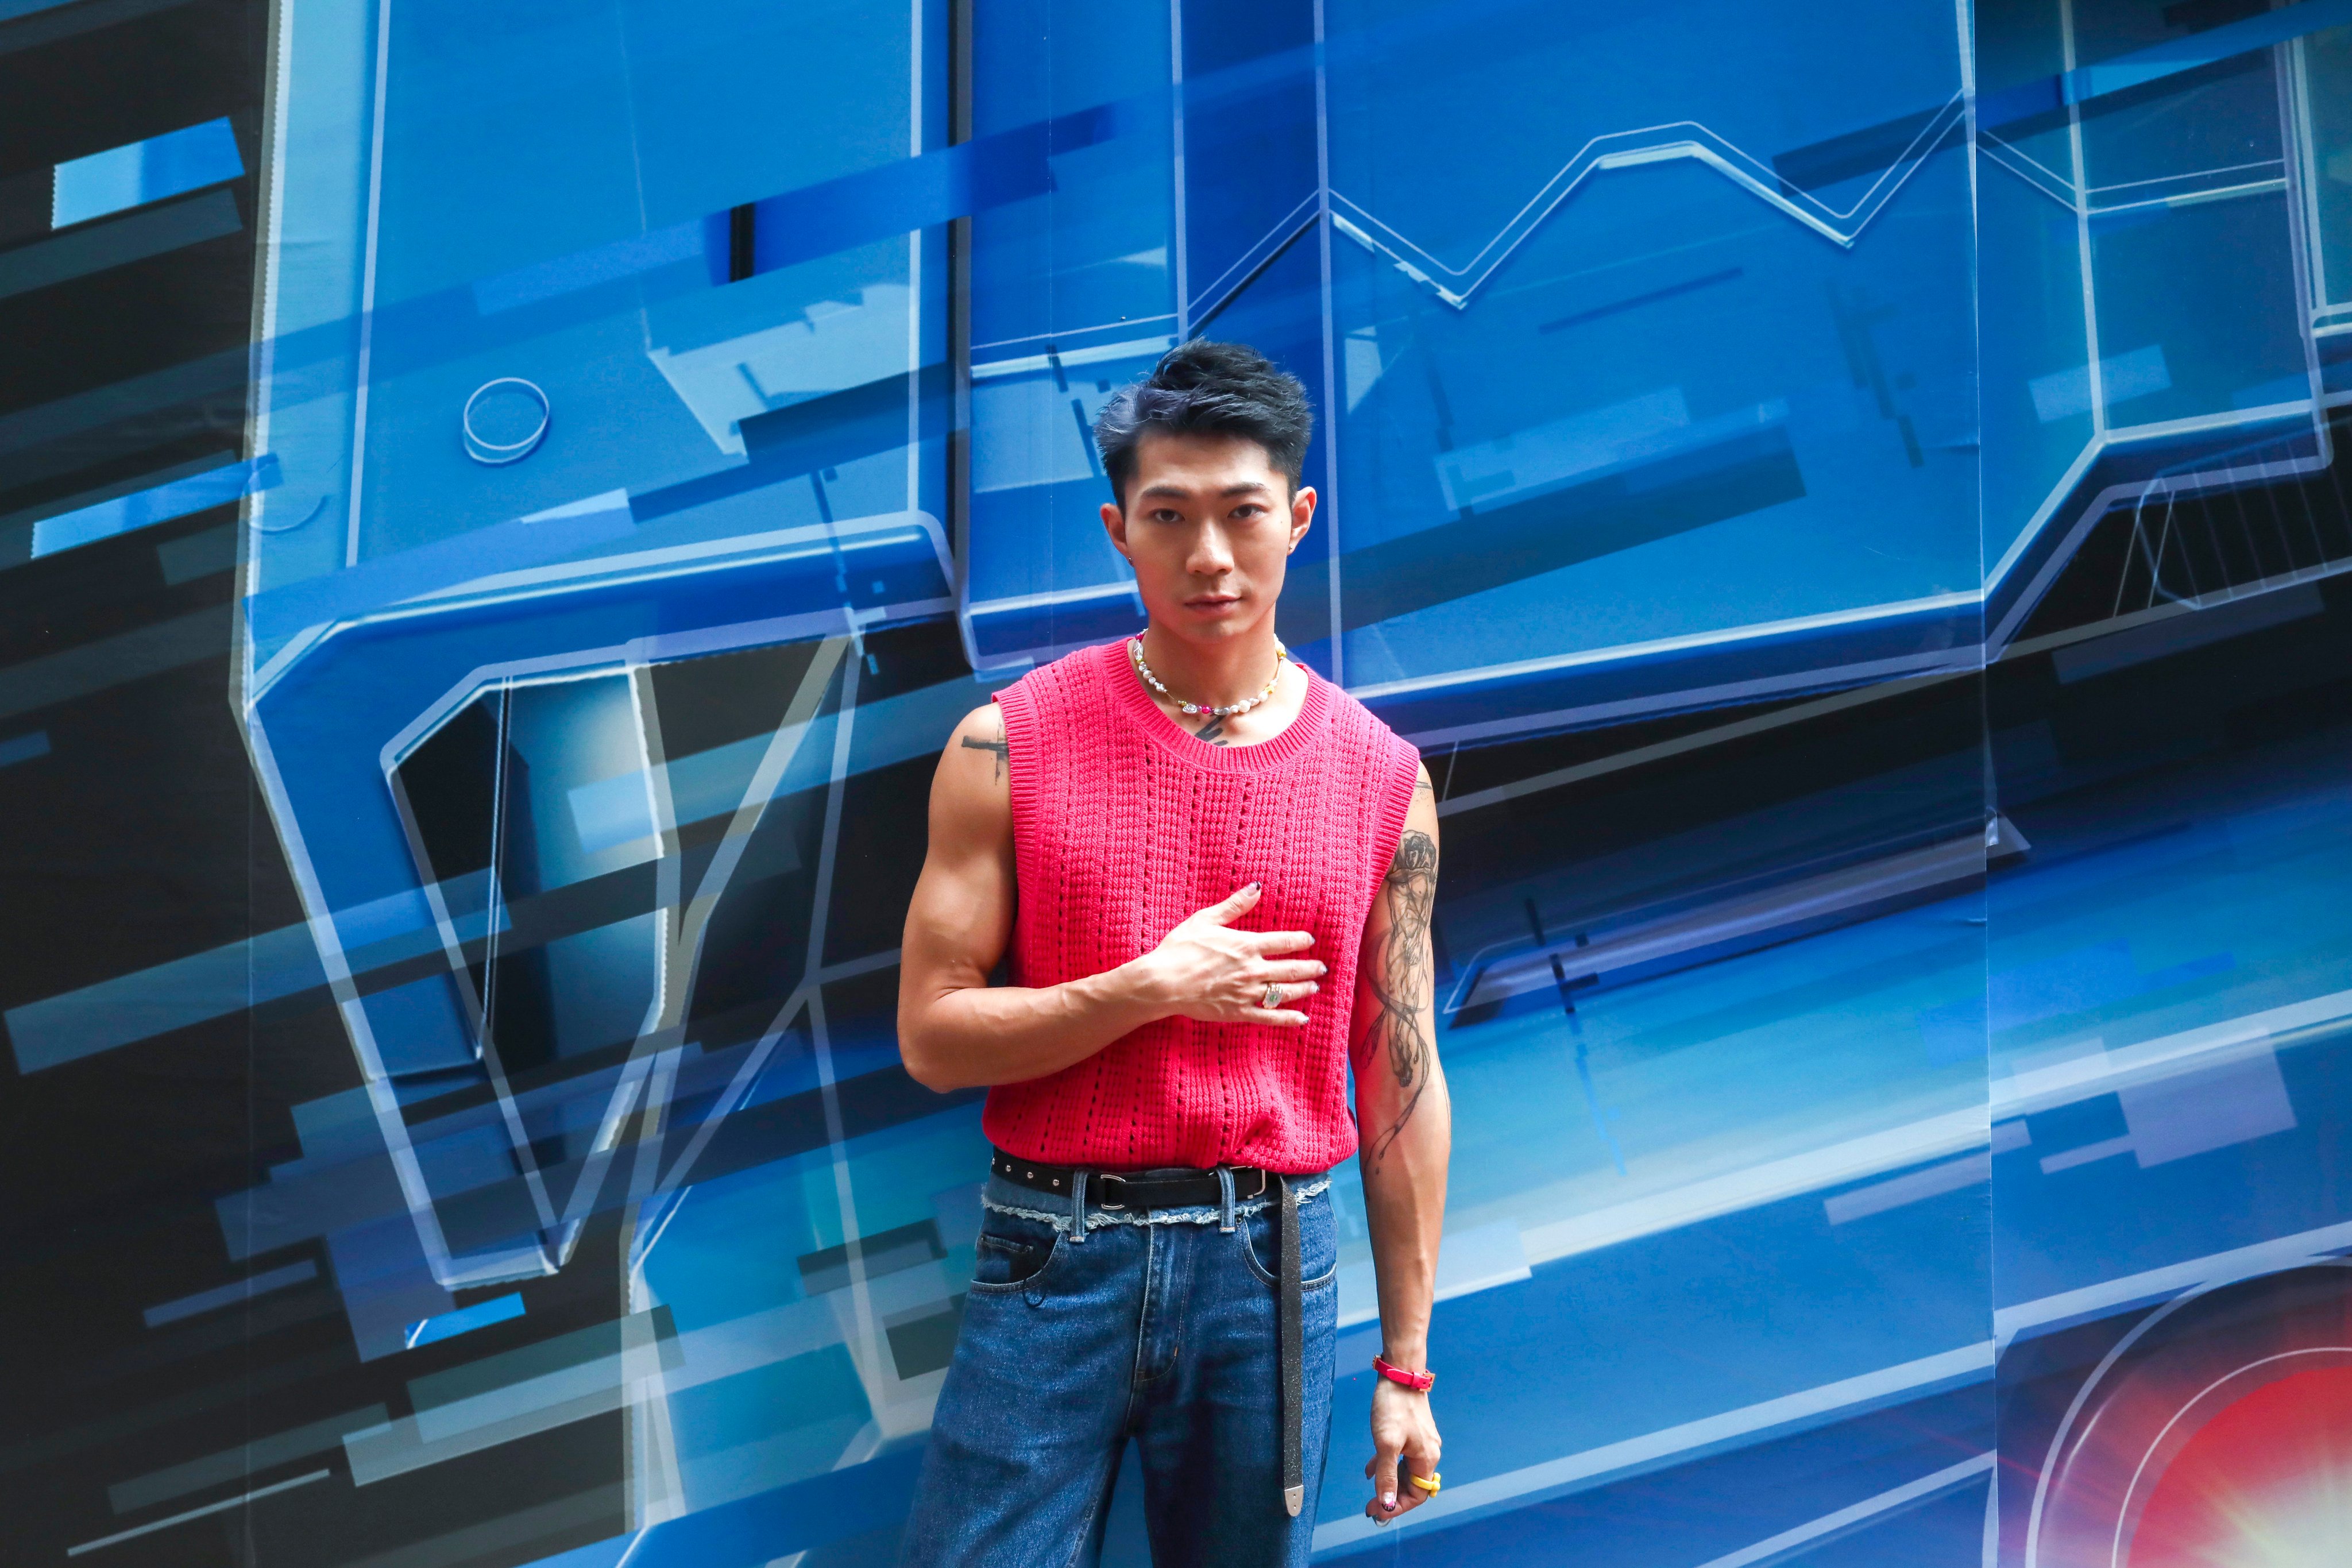 Singer Zelos Wong says his life has improved since he came out because he now knows himself better. Photo: Jonathan Wong